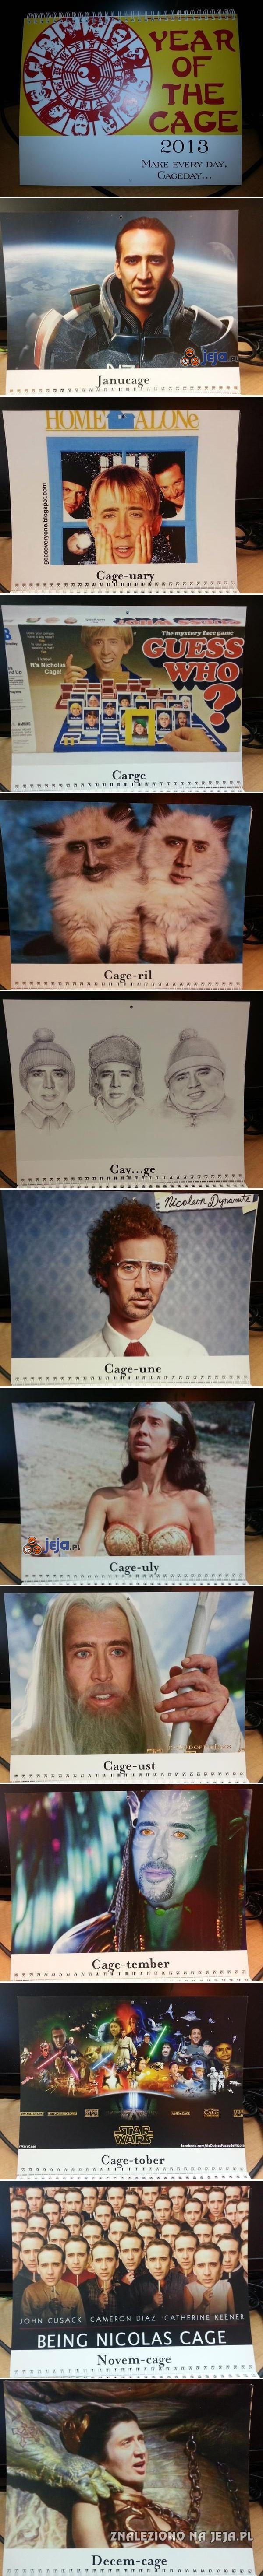 Year of the Cage